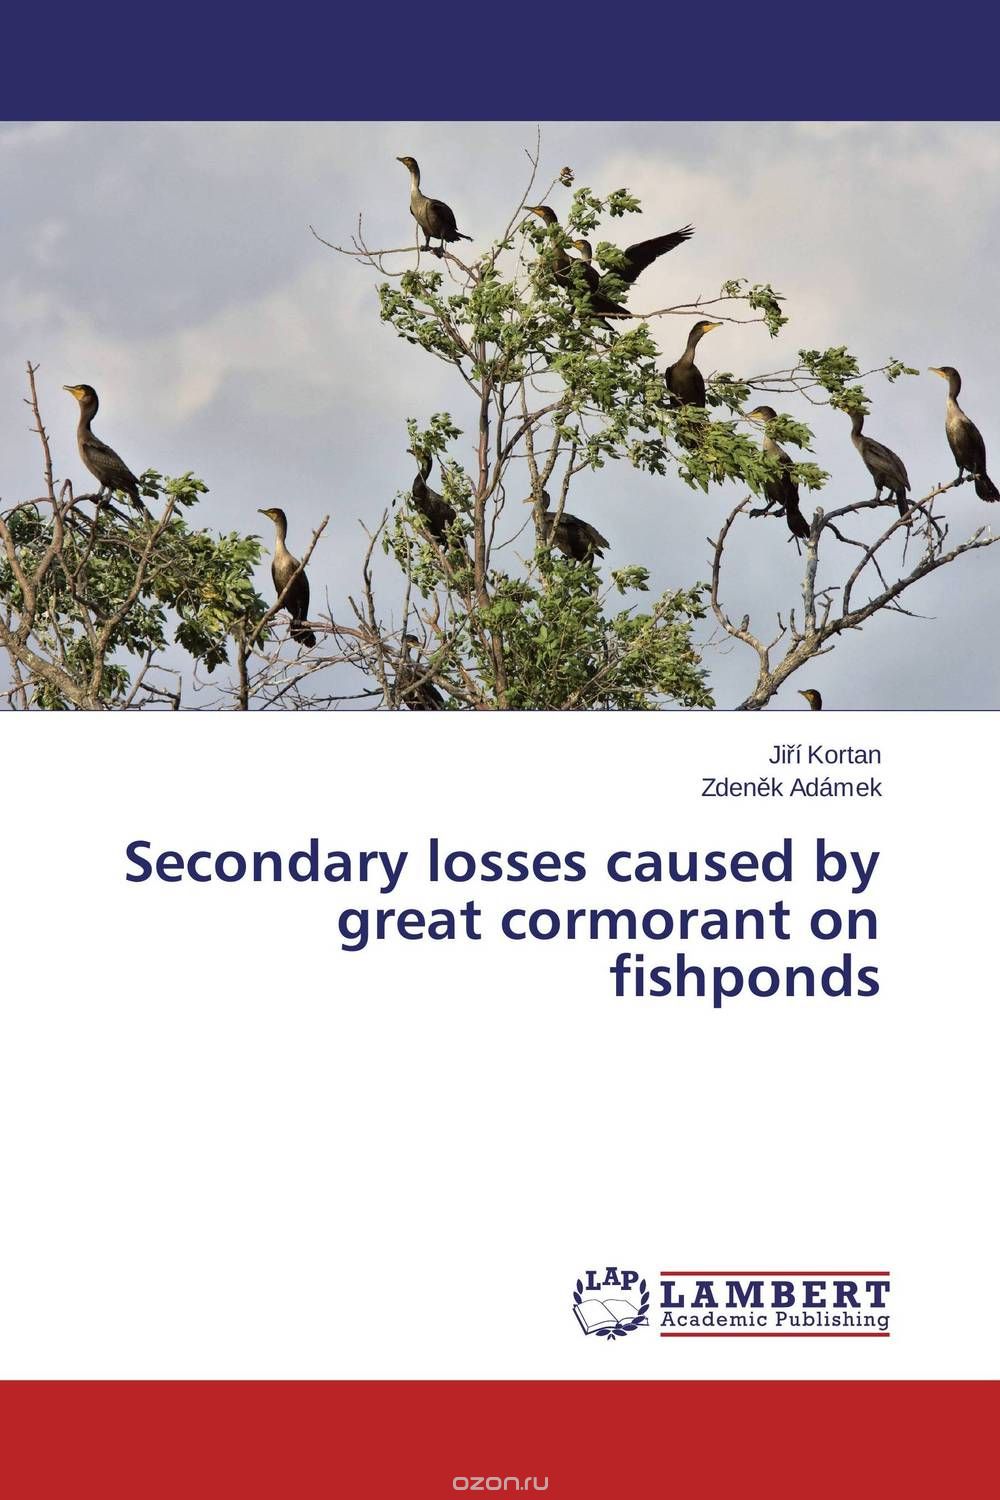 Secondary losses caused by great cormorant on fishponds